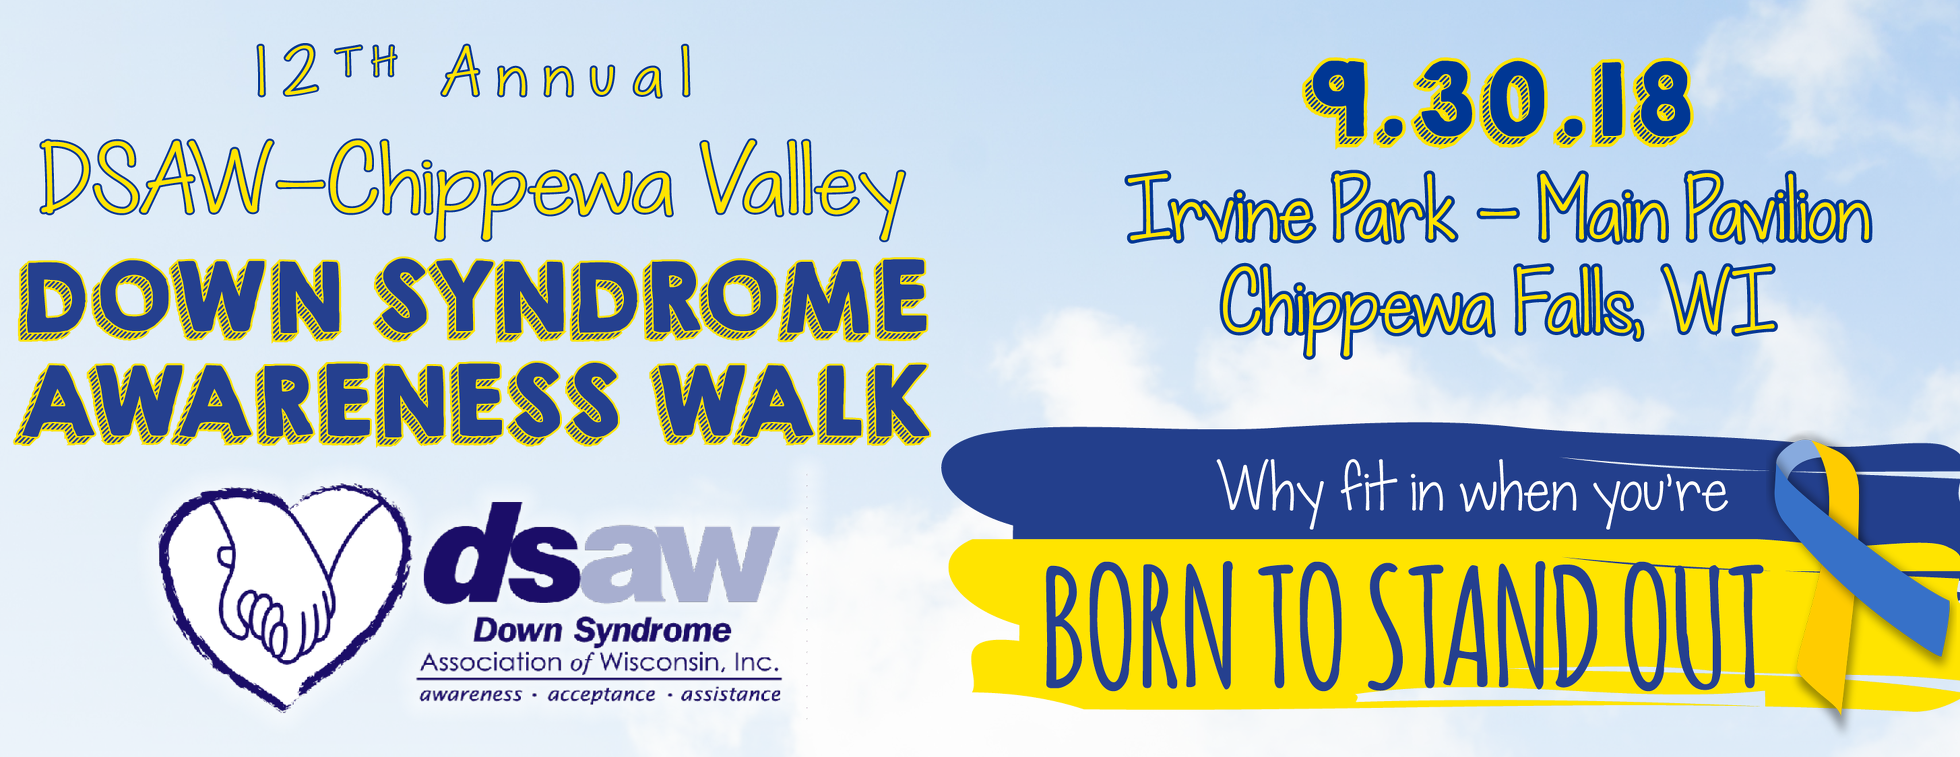 12th Annual Chippewa Valley Down Syndrome Awareness Walk